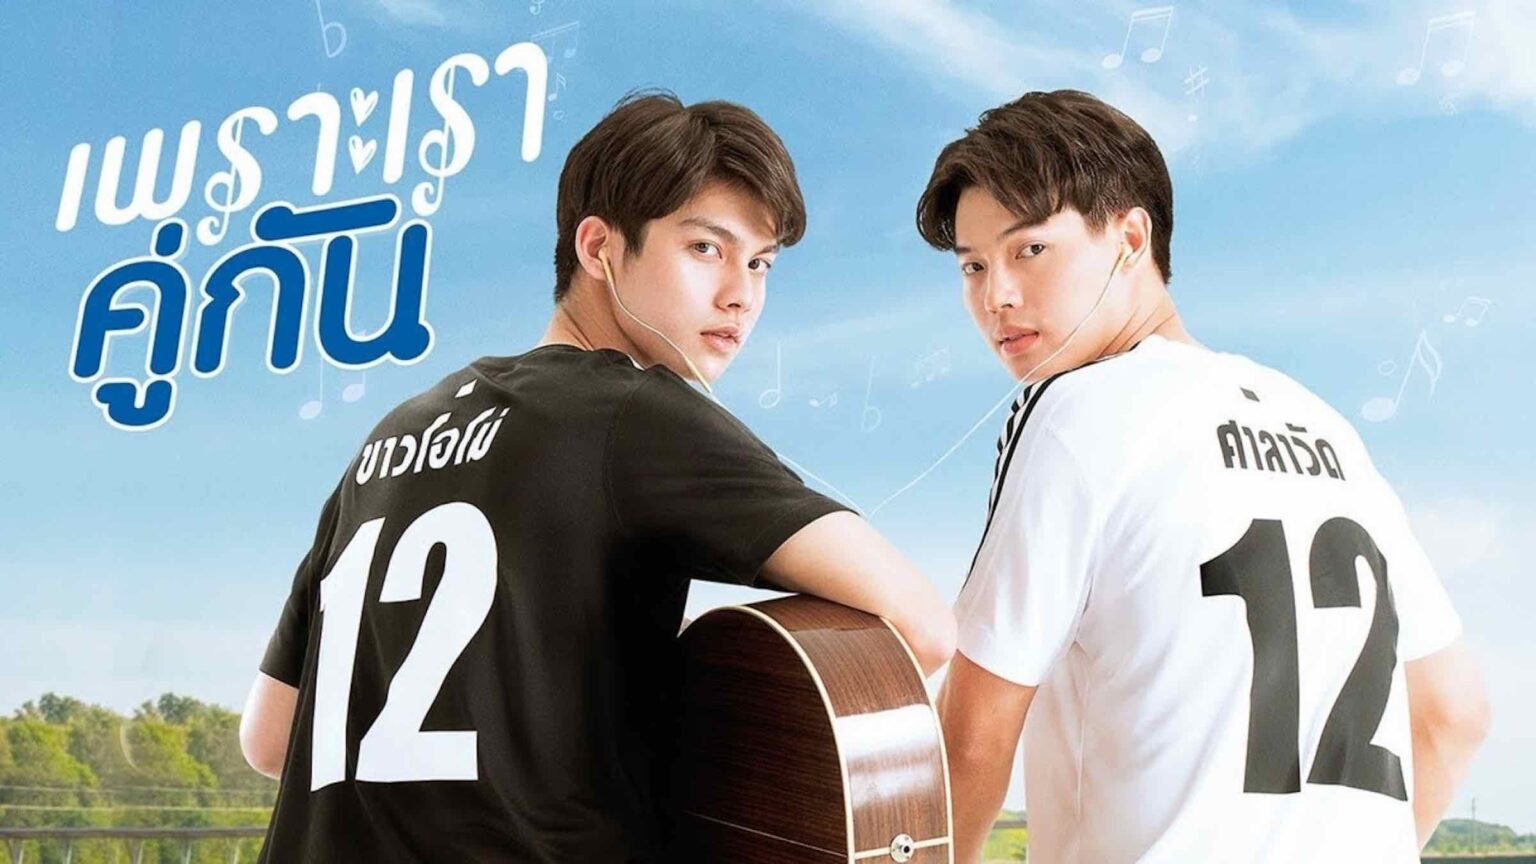 The Thai boy love series '2Gether' has charmed audiences since it was released in February 2020. Here are the best '2Gether' quotes.